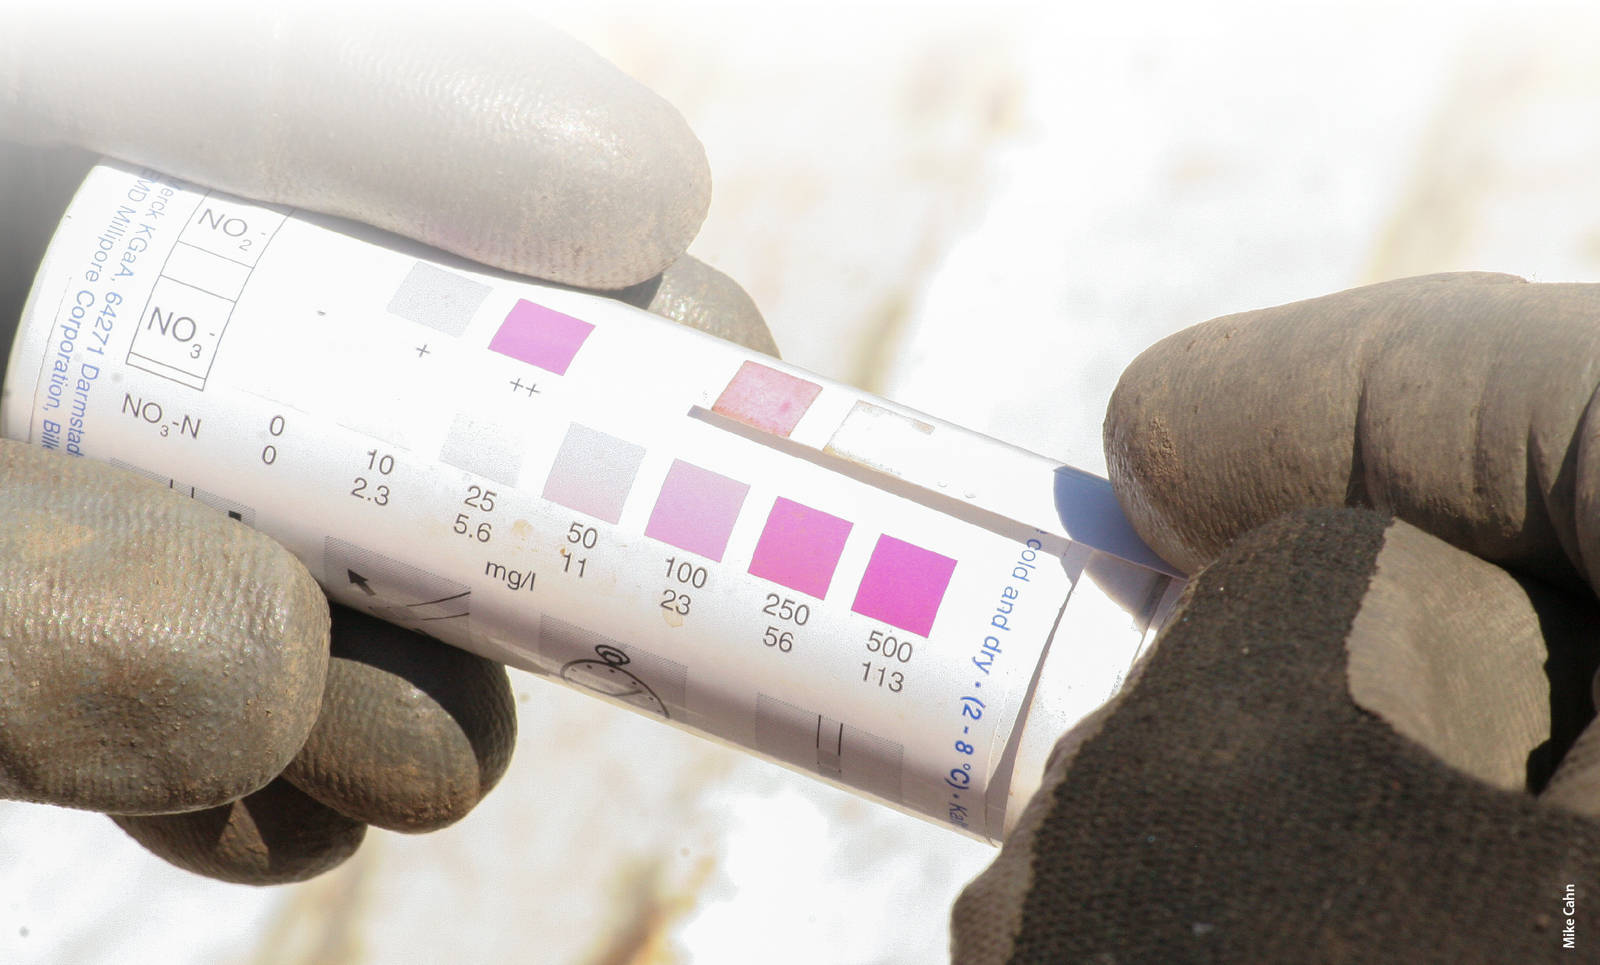 Inexpensive nitrate test strips allow on-farm estimation of irrigation water NO3-N concentration. In Salinas Valley irrigation wells, levels of NO3-N commonly range from 10 to 40 mg/L, which could supply a substantial portion of crop N requirements.